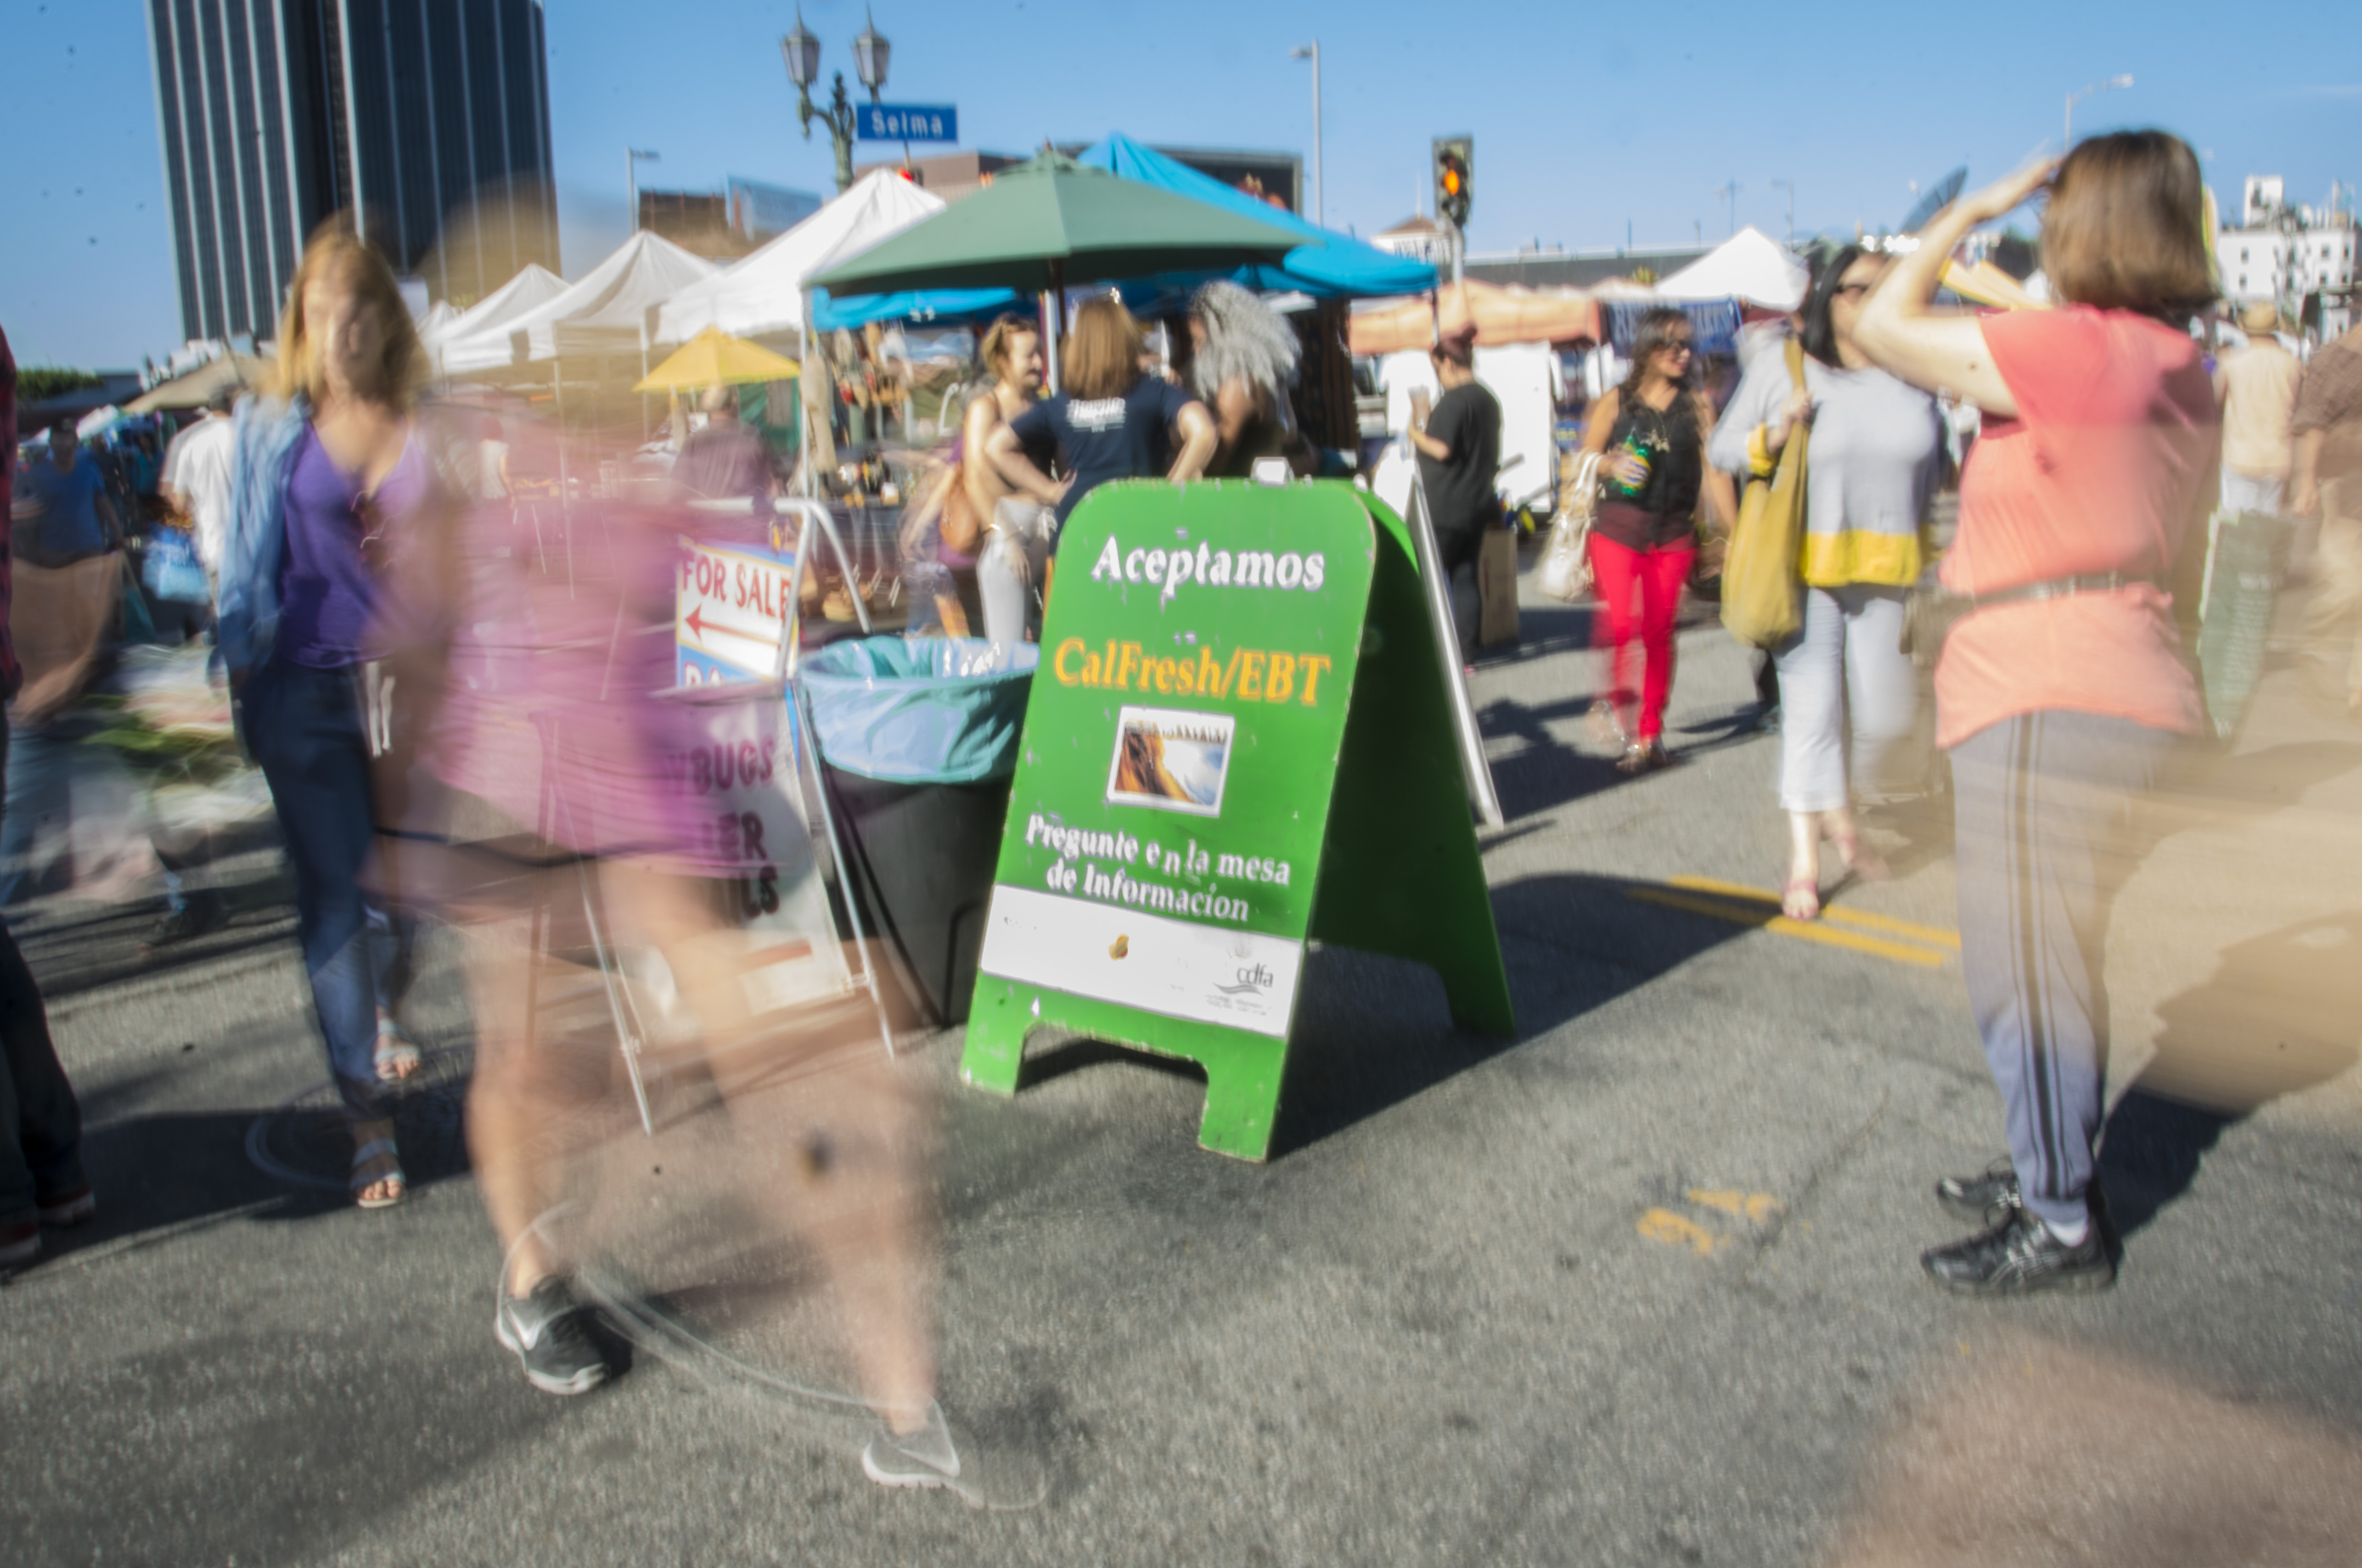 KPCC: Should farmers markets be required to accept food stamps? City Council weighs in